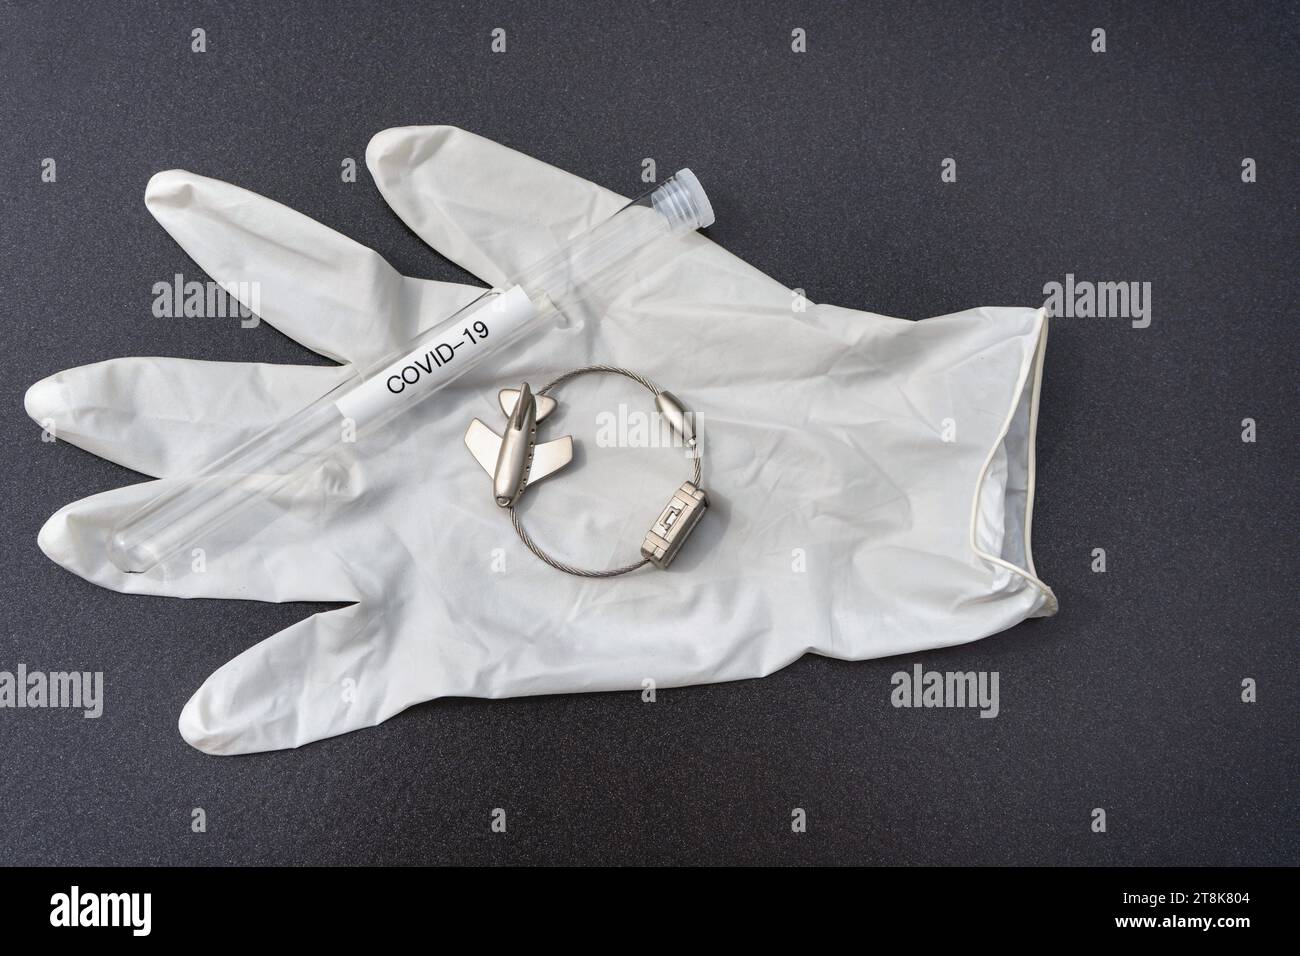 latex glove, test tubule, and luggage tag with plane, flight voyage under Corona conditions Stock Photo